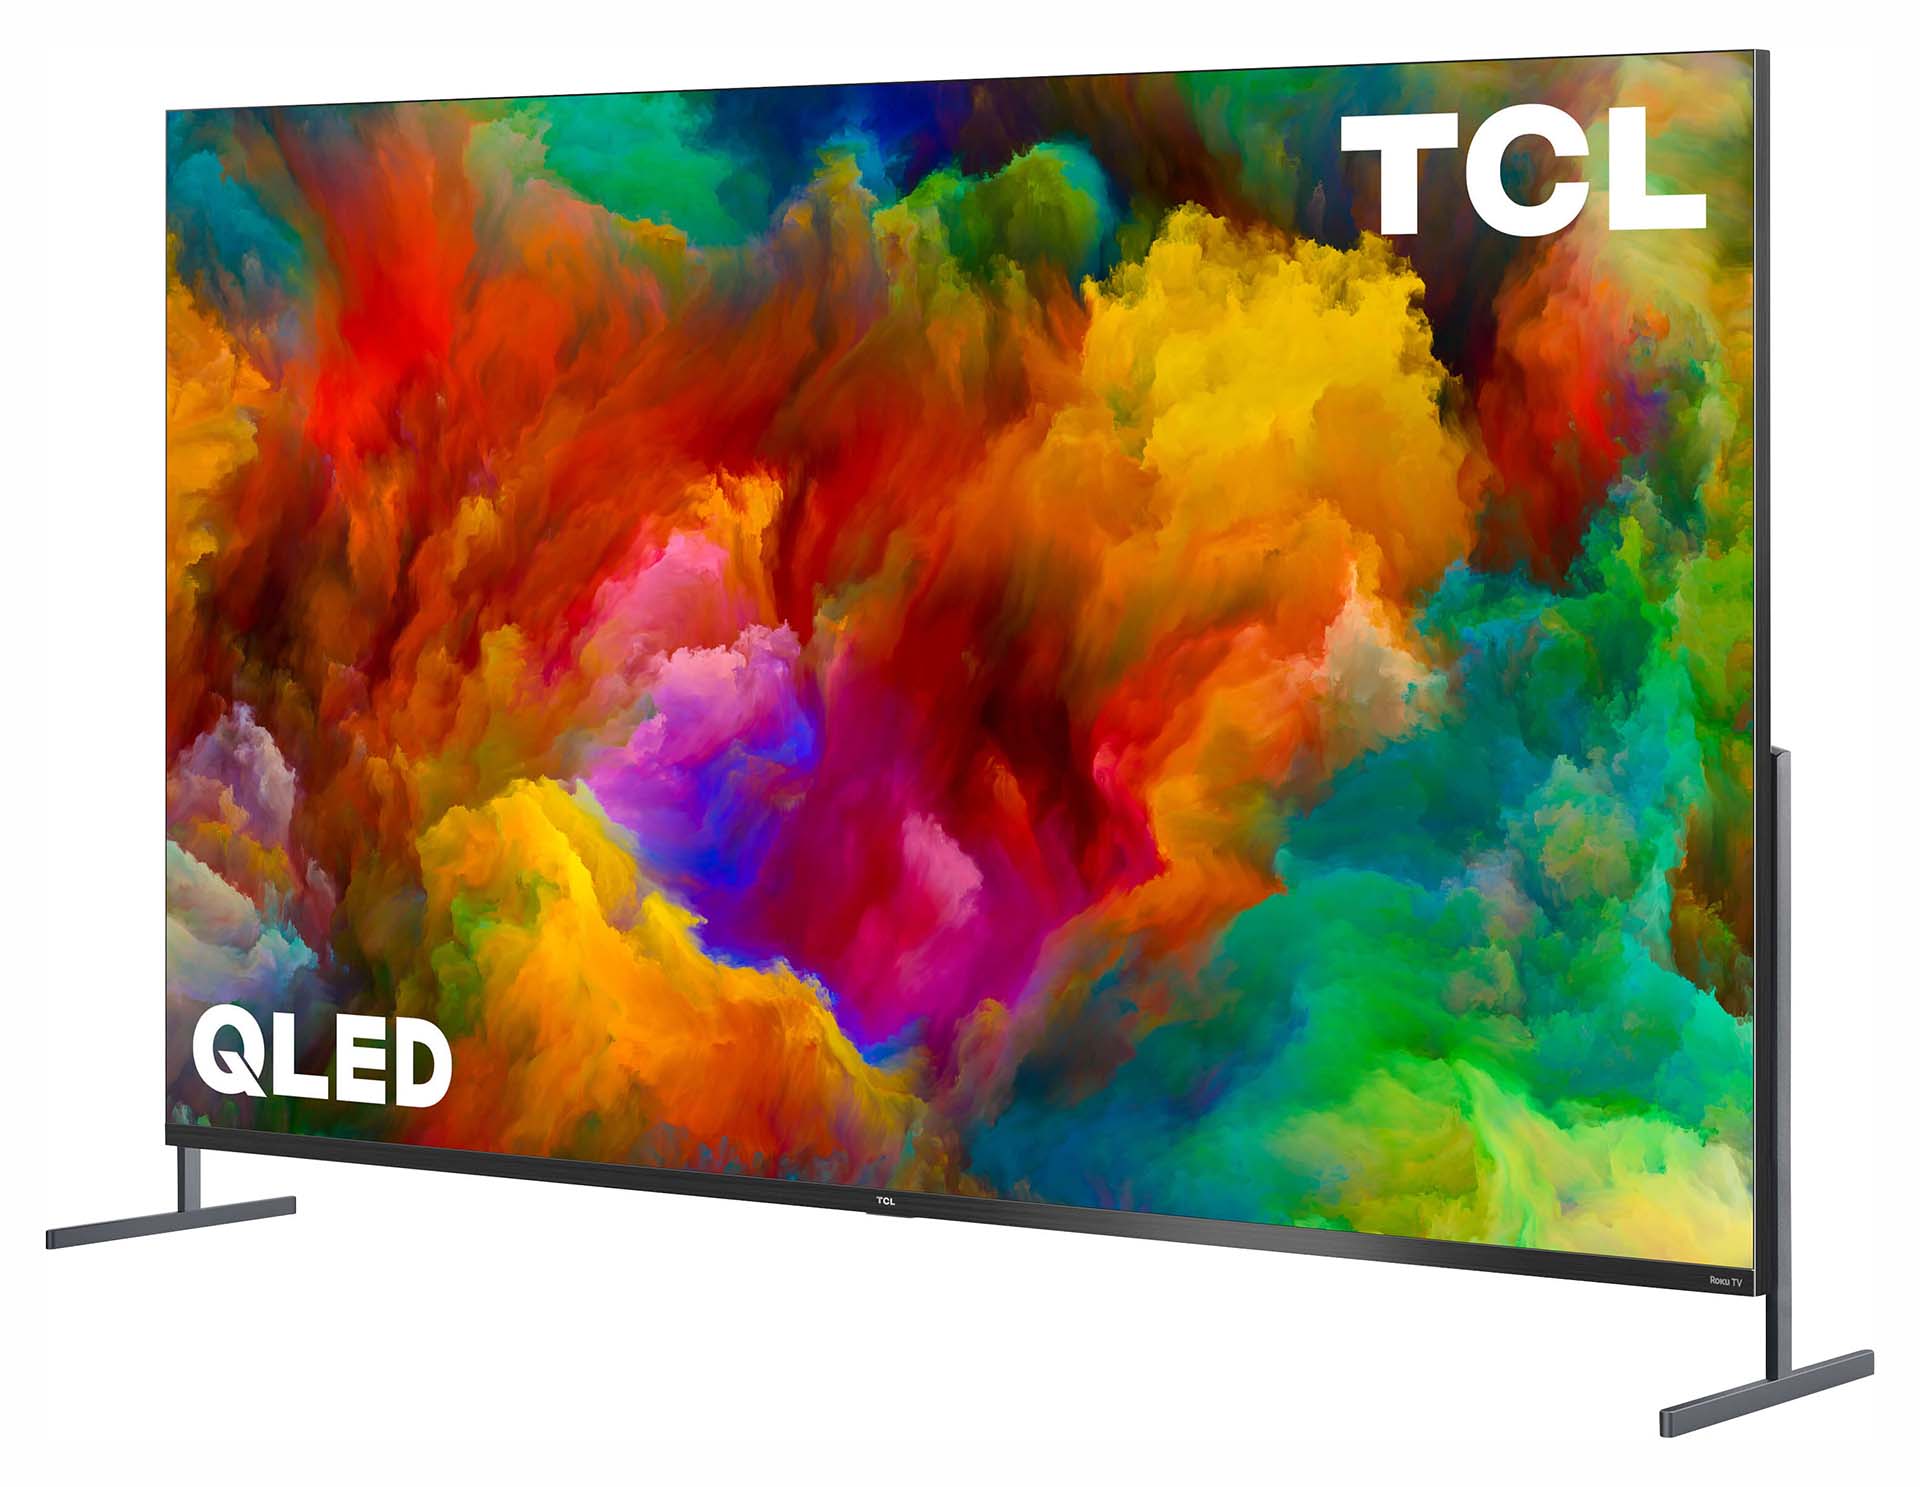 This year, 98" is the new 85" ff3fc524 tcl 85 inch